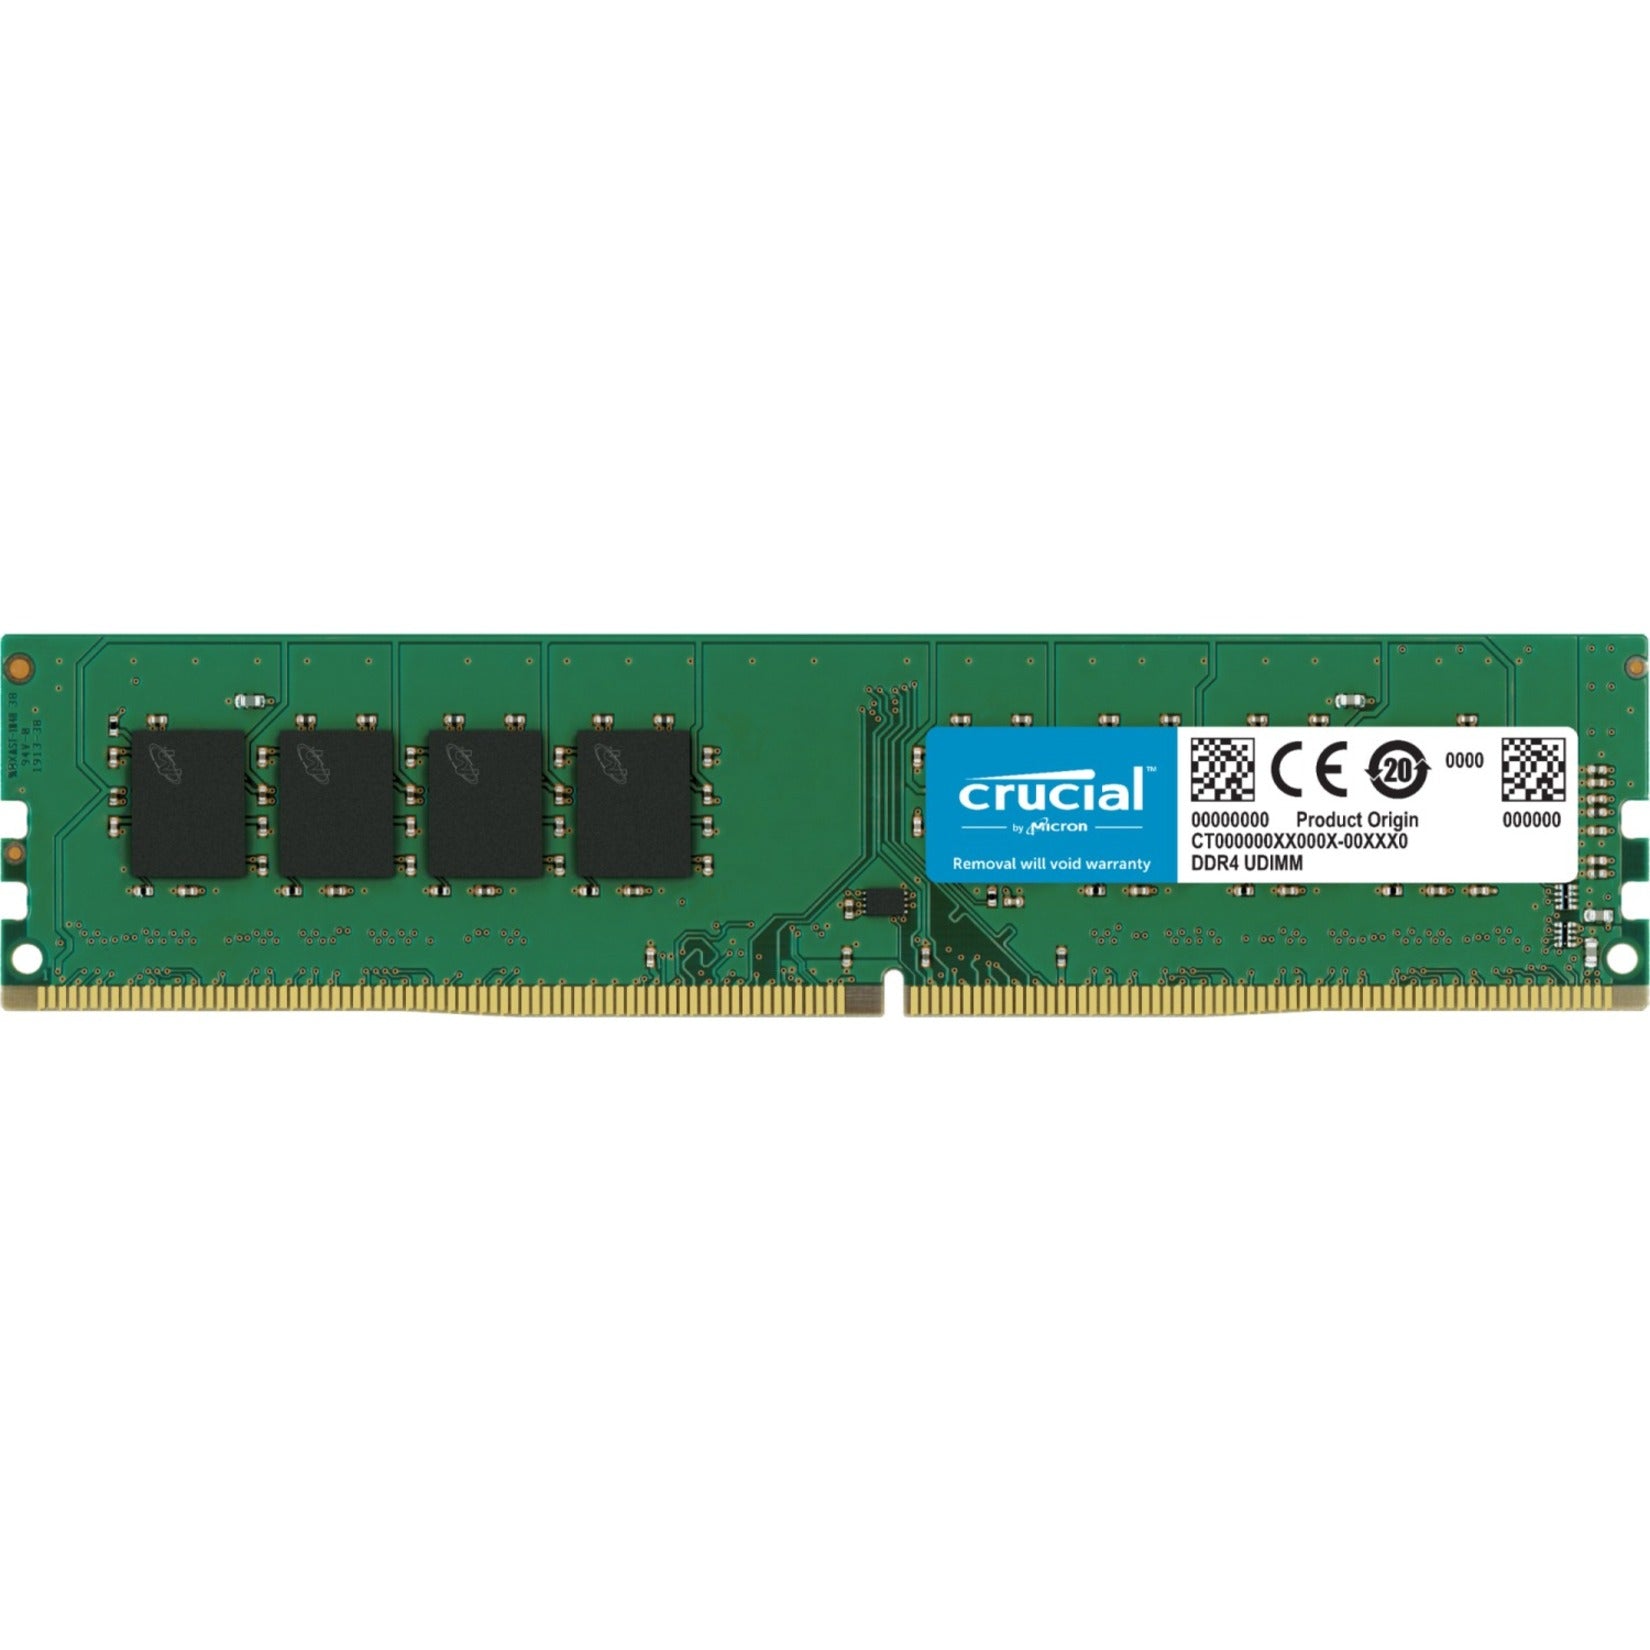 Crucial CT32G4DFD832A 32GB DDR4 SDRAM Memory Module, High Performance RAM for Desktop PC and Server